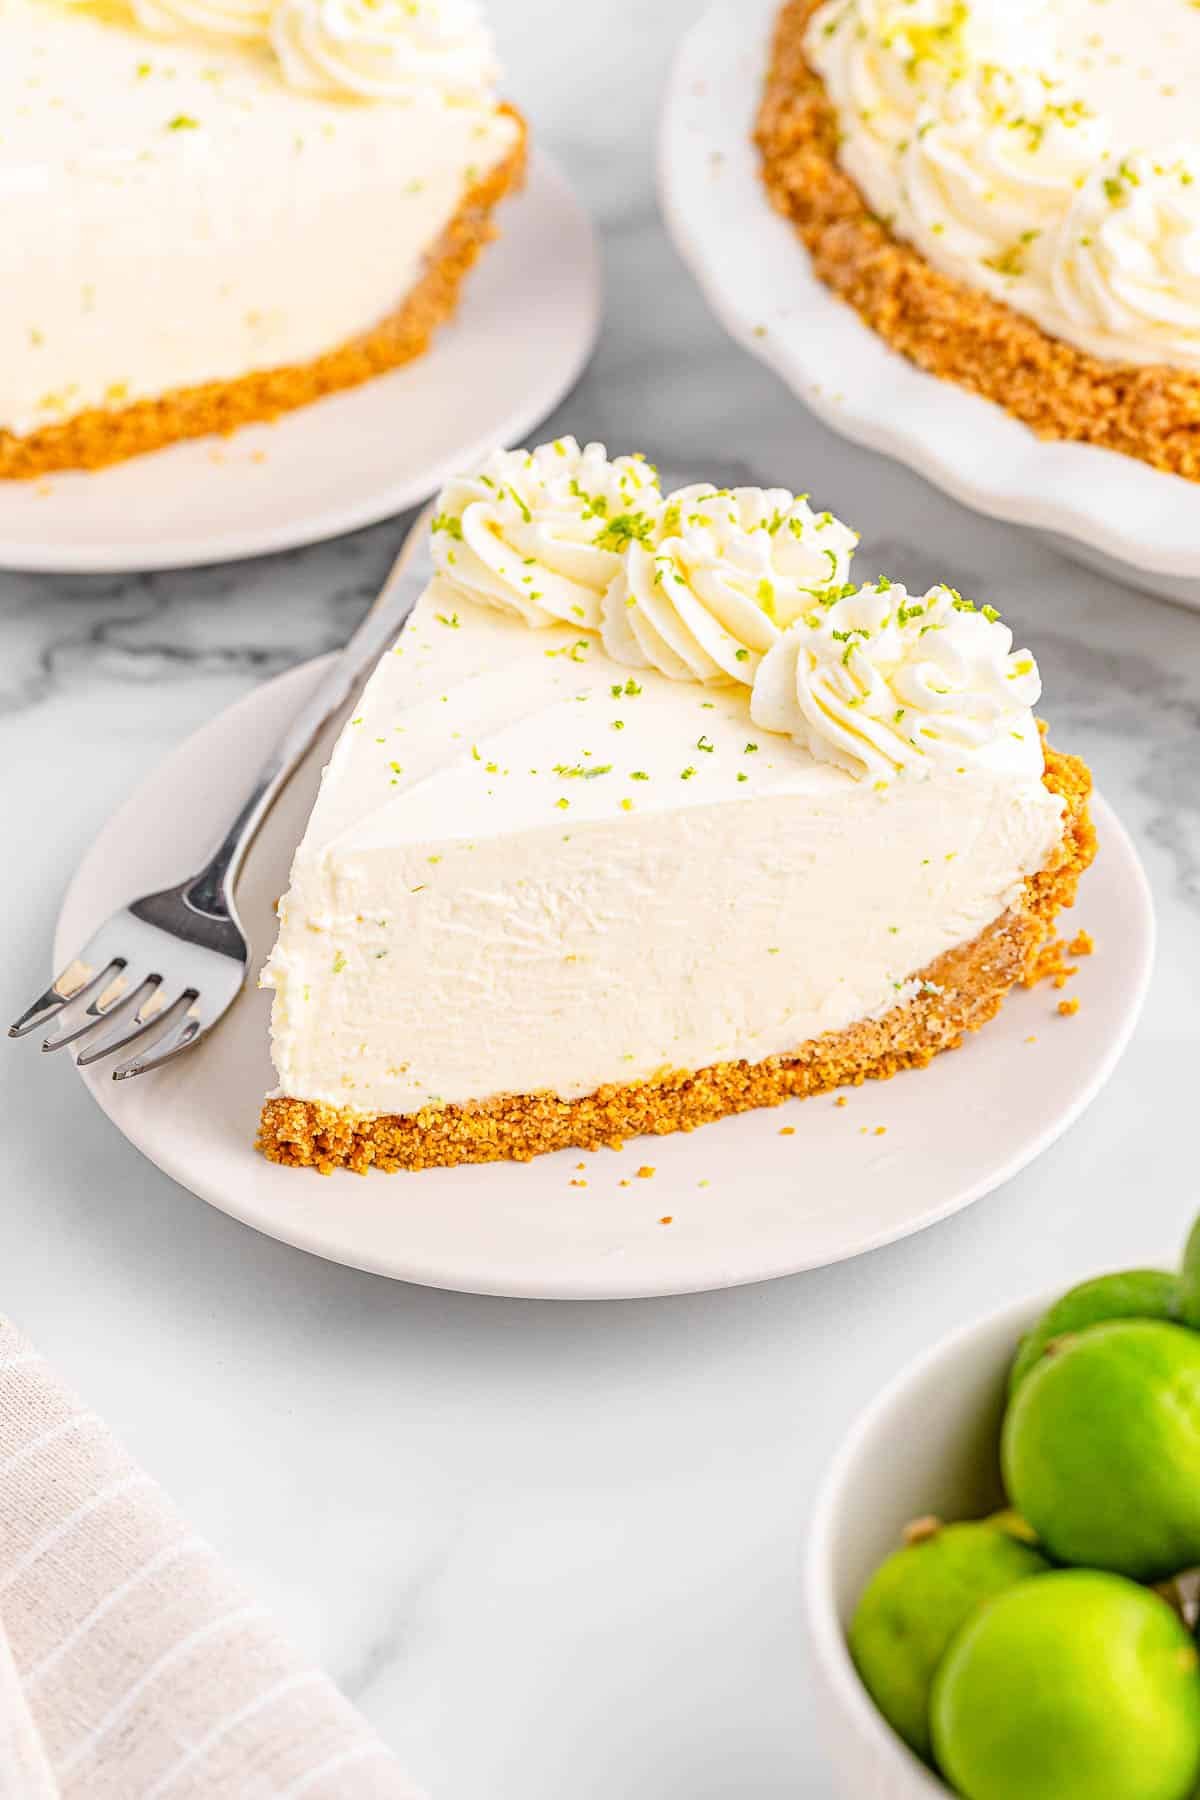 A slice of key lime pie on a white plate.